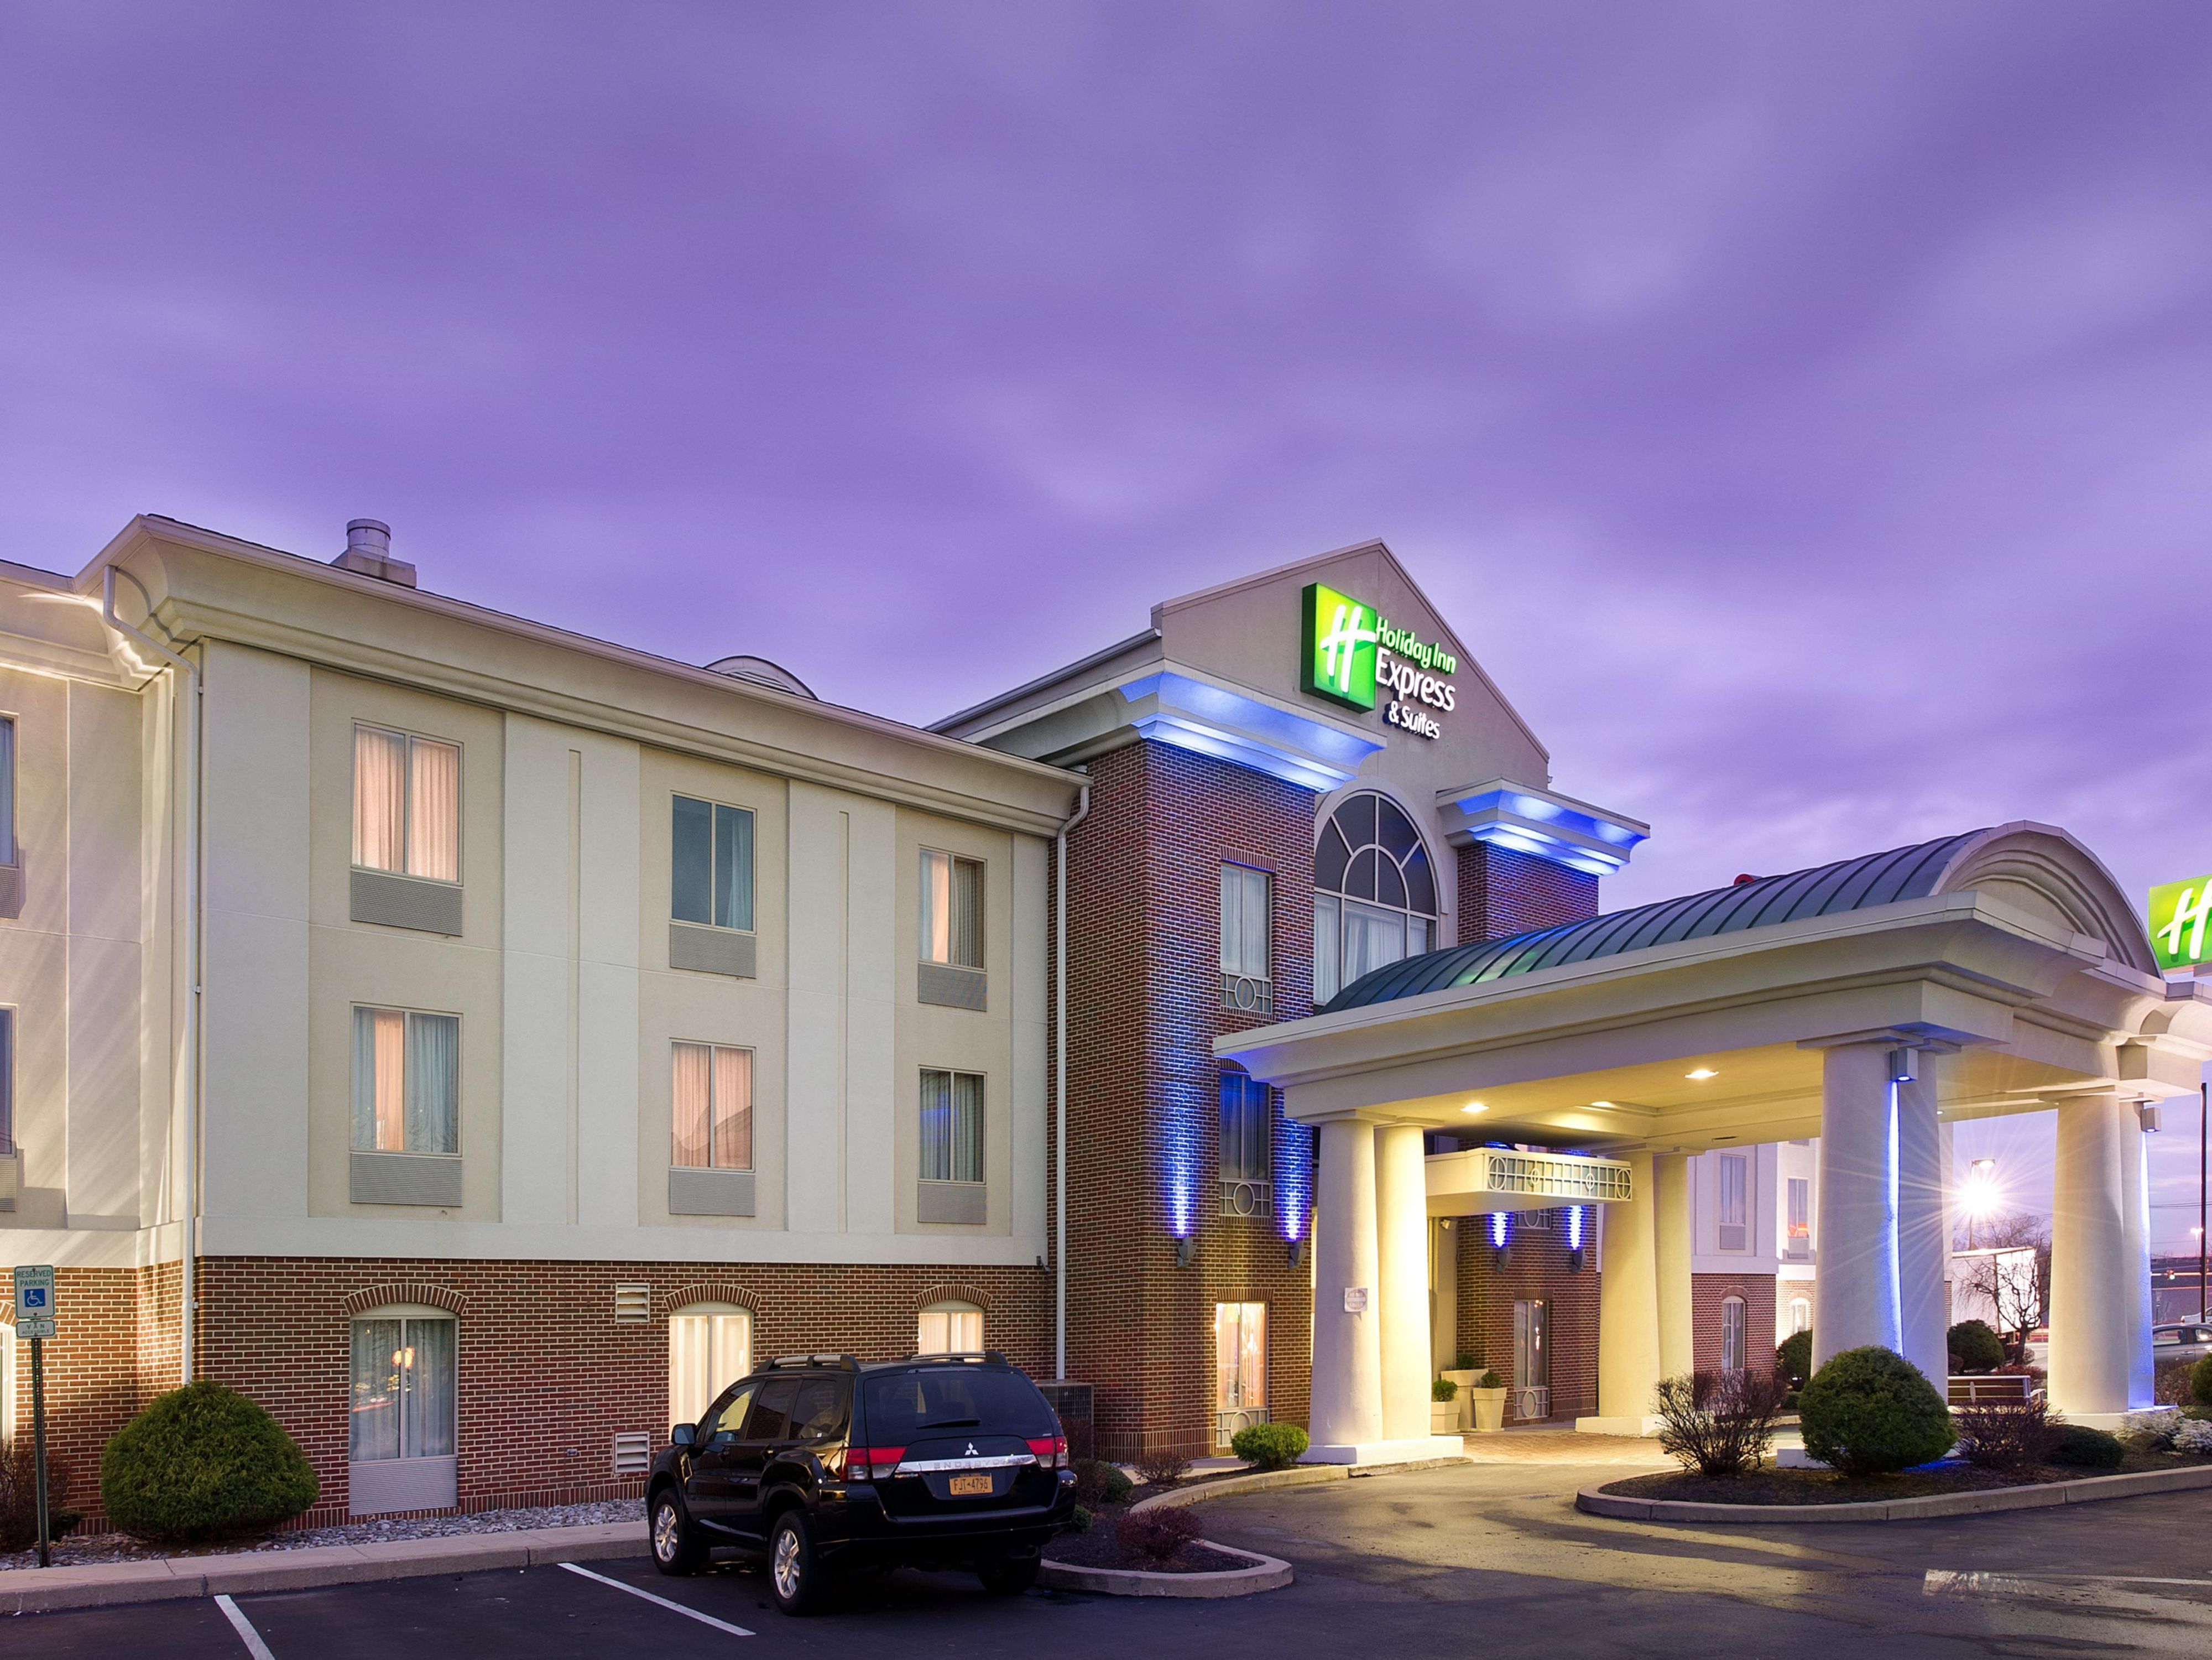 The Best 15 Holiday Inn Express Winfield Wv caseyouimage